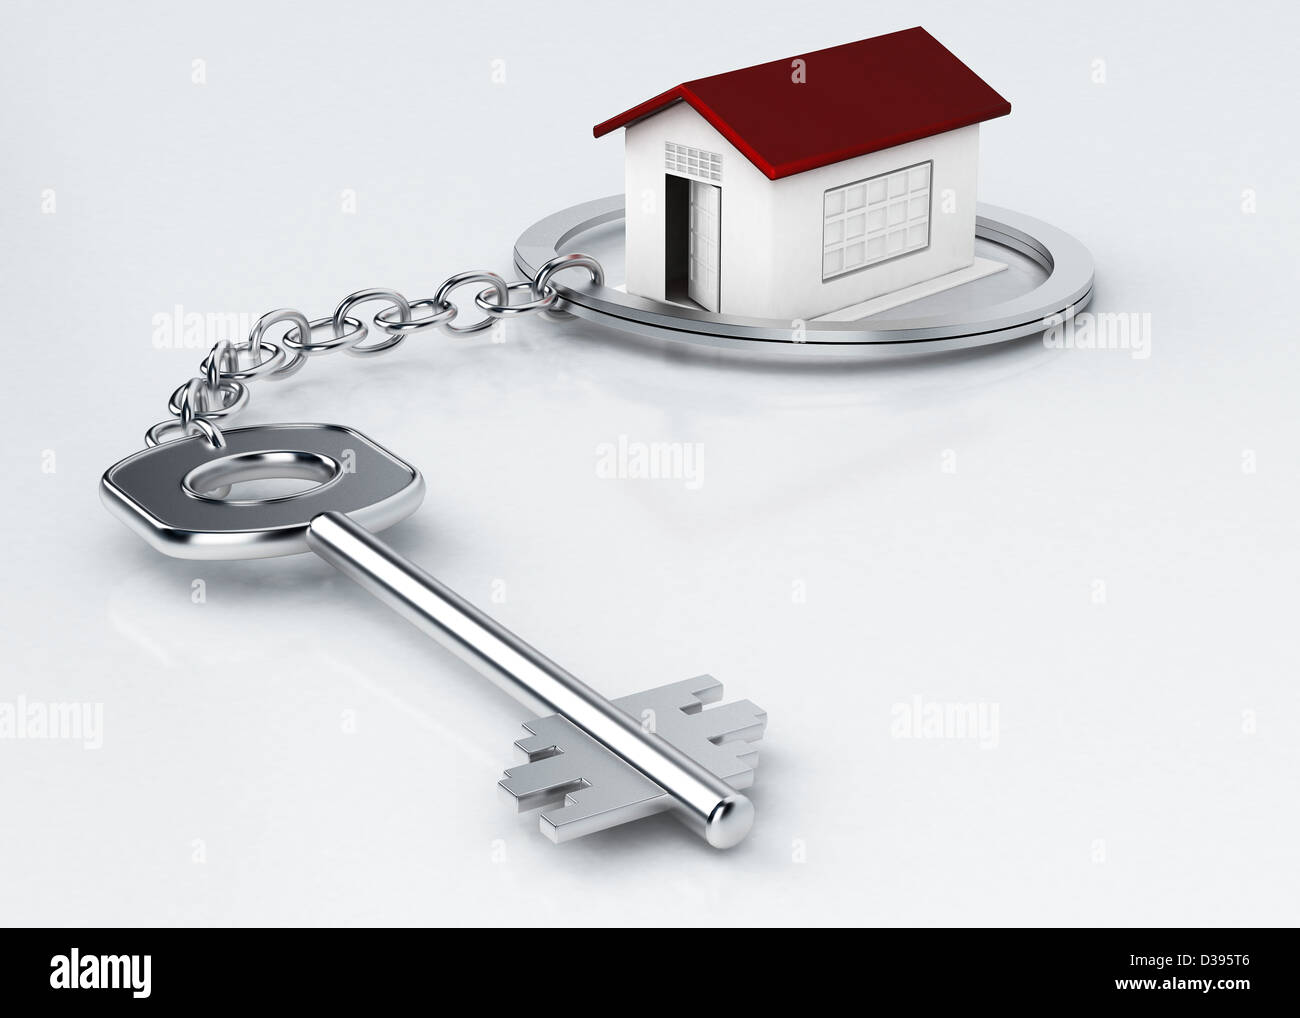 Model house surrounded by key ring over white background Stock Photo